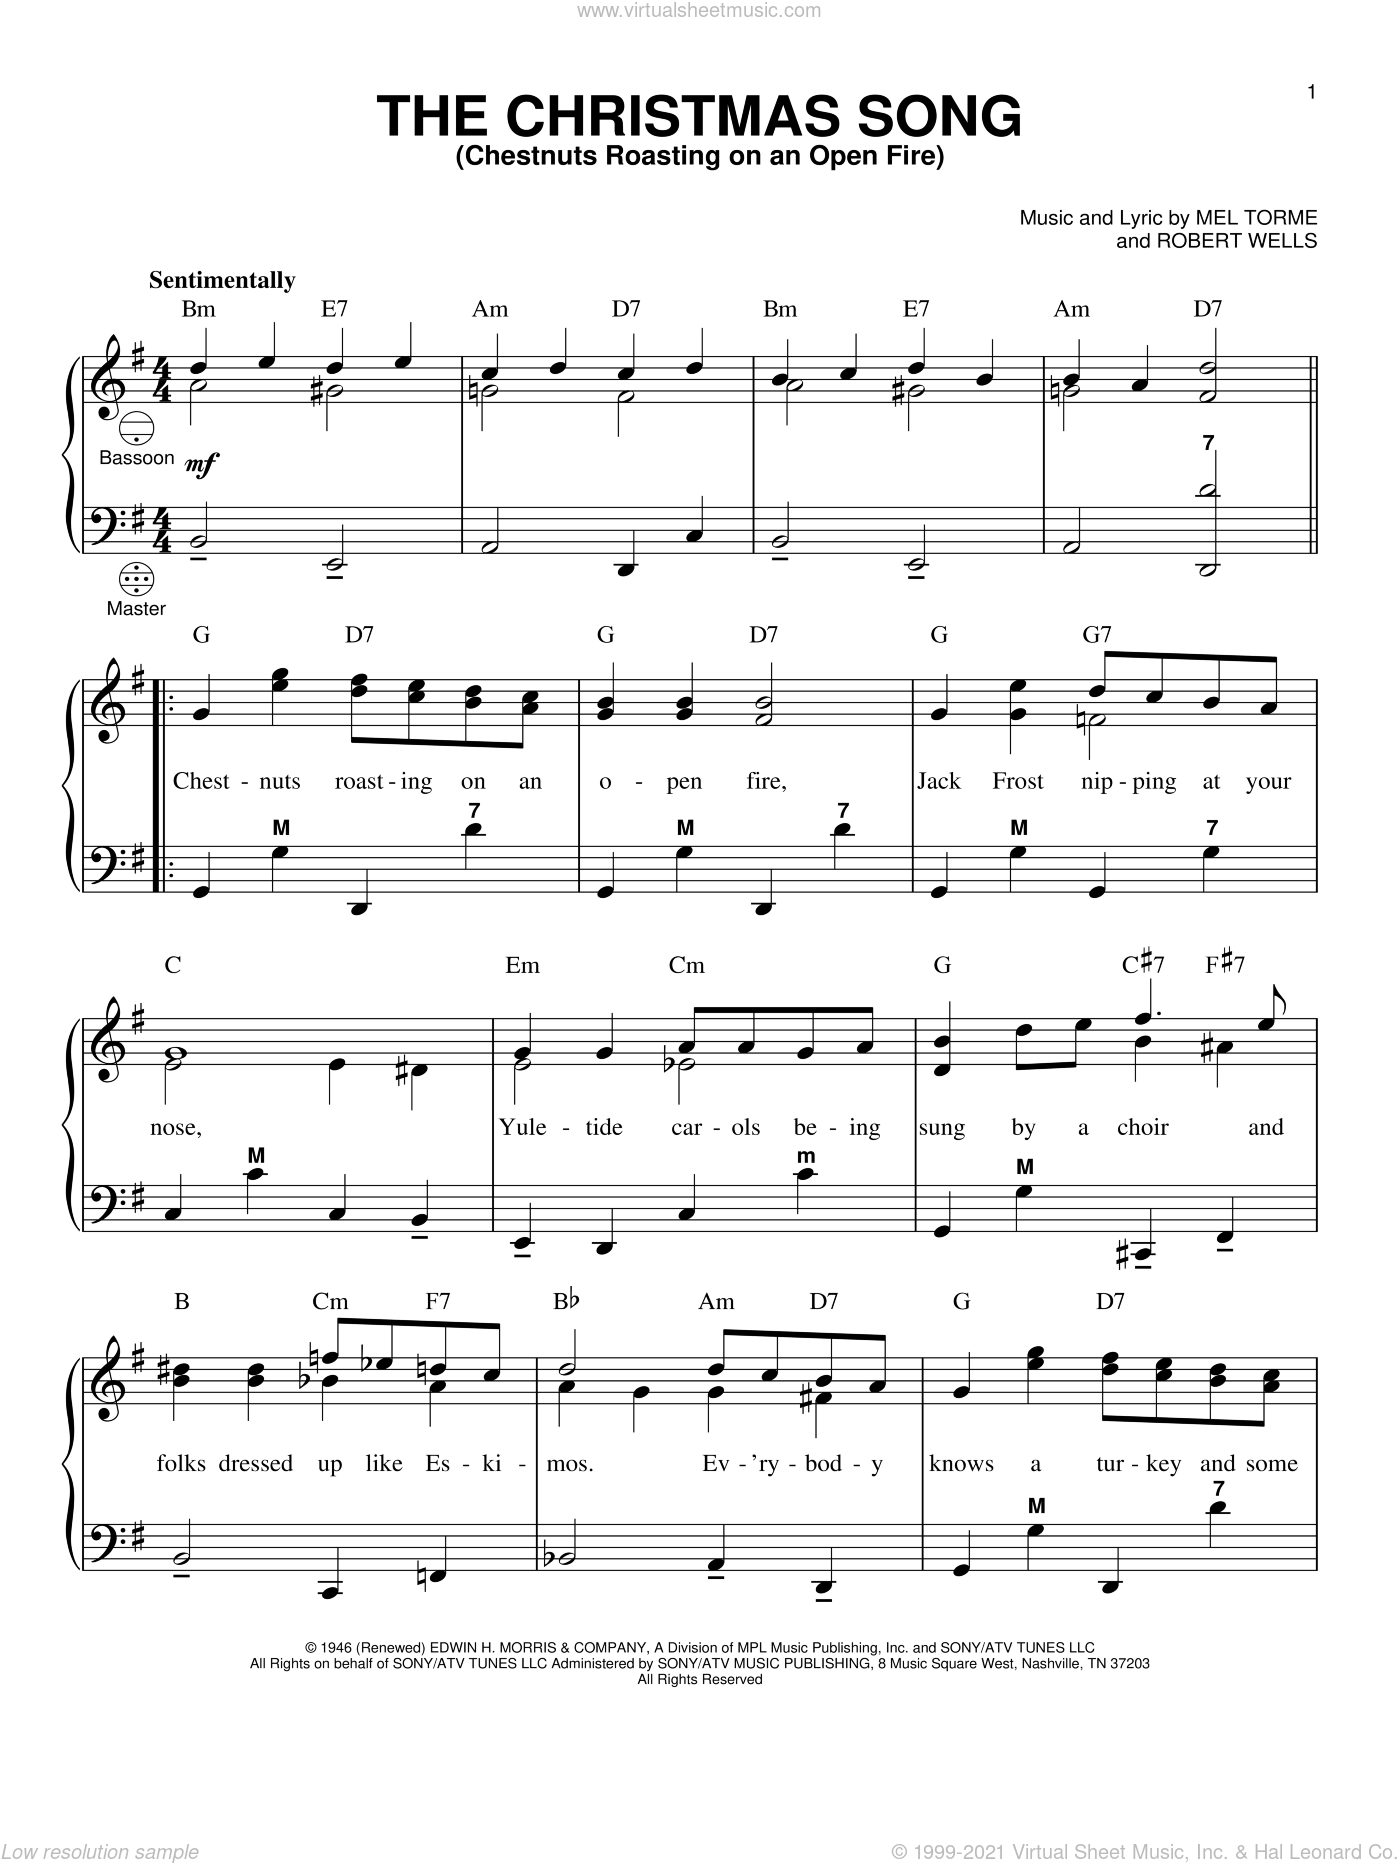 Torme - The Christmas Song sheet music for accordion PDF